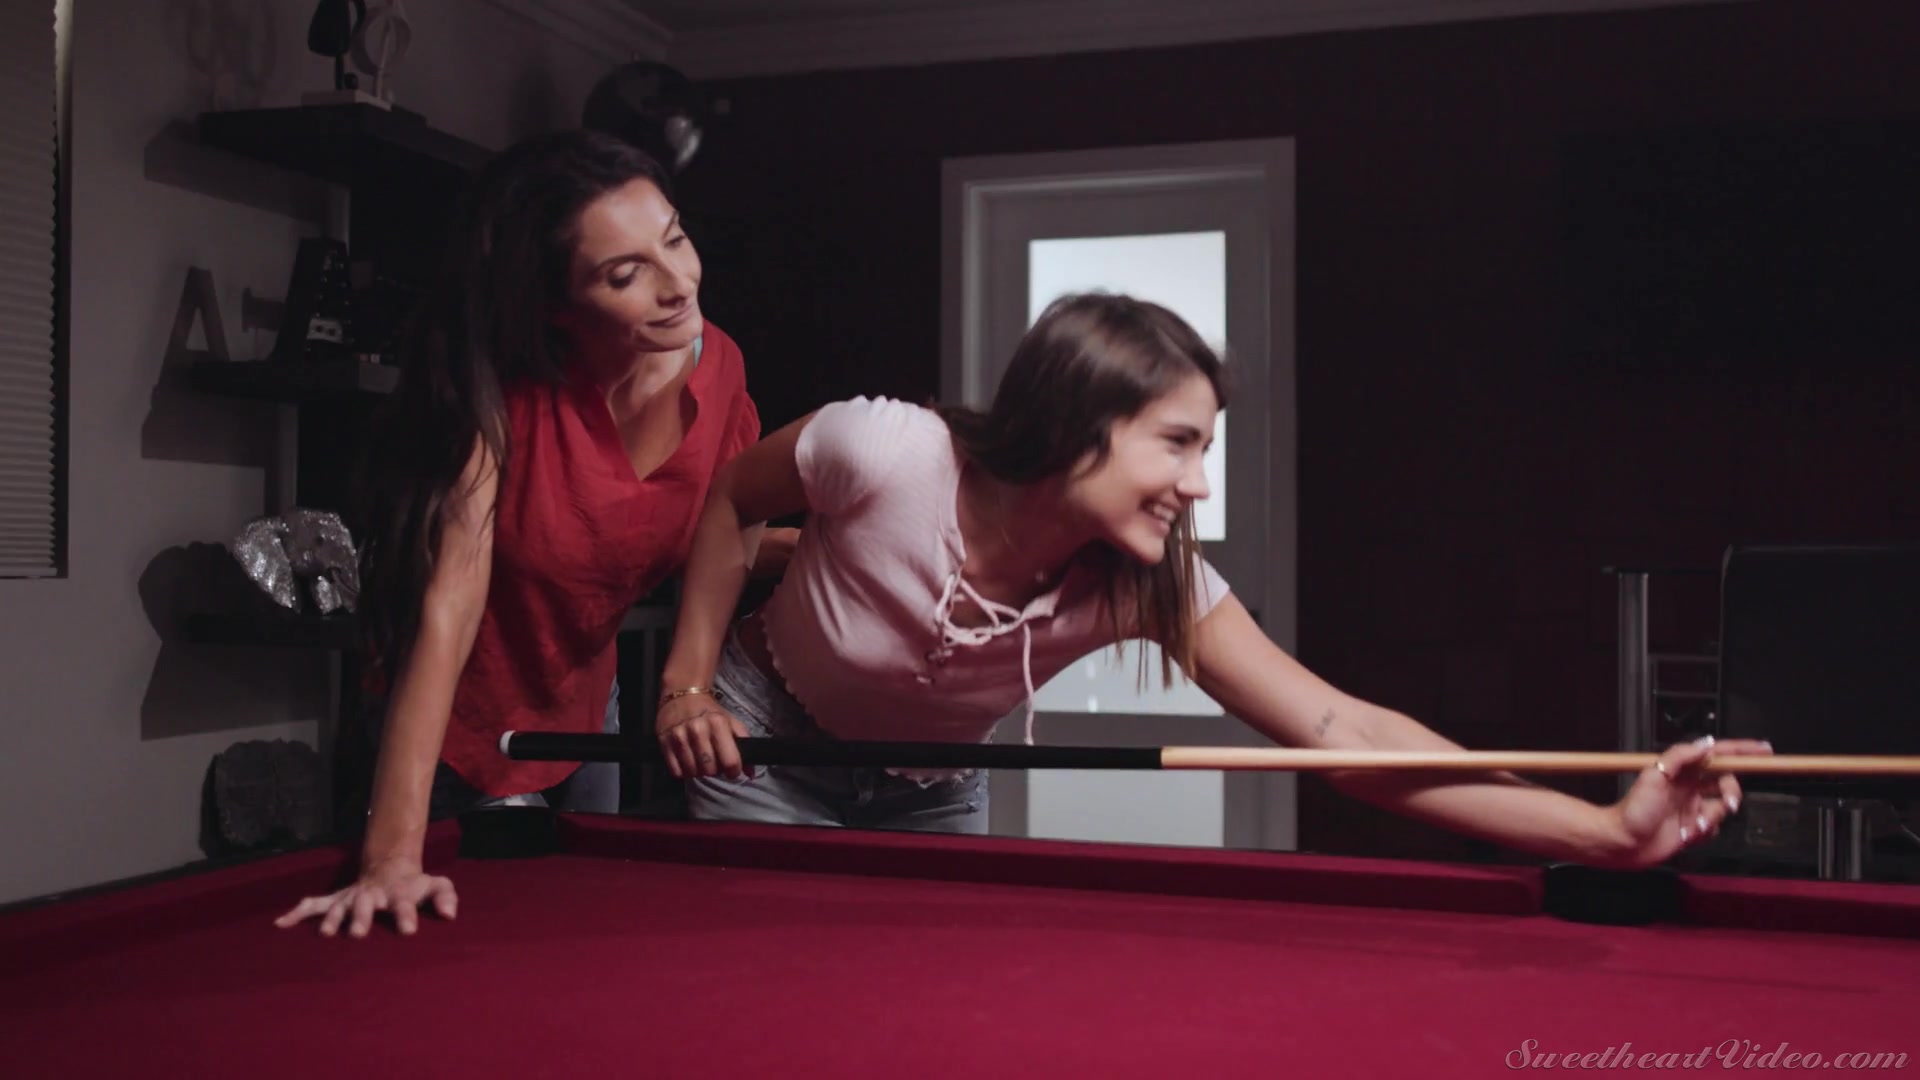 Lesbian love making on the pool table pic